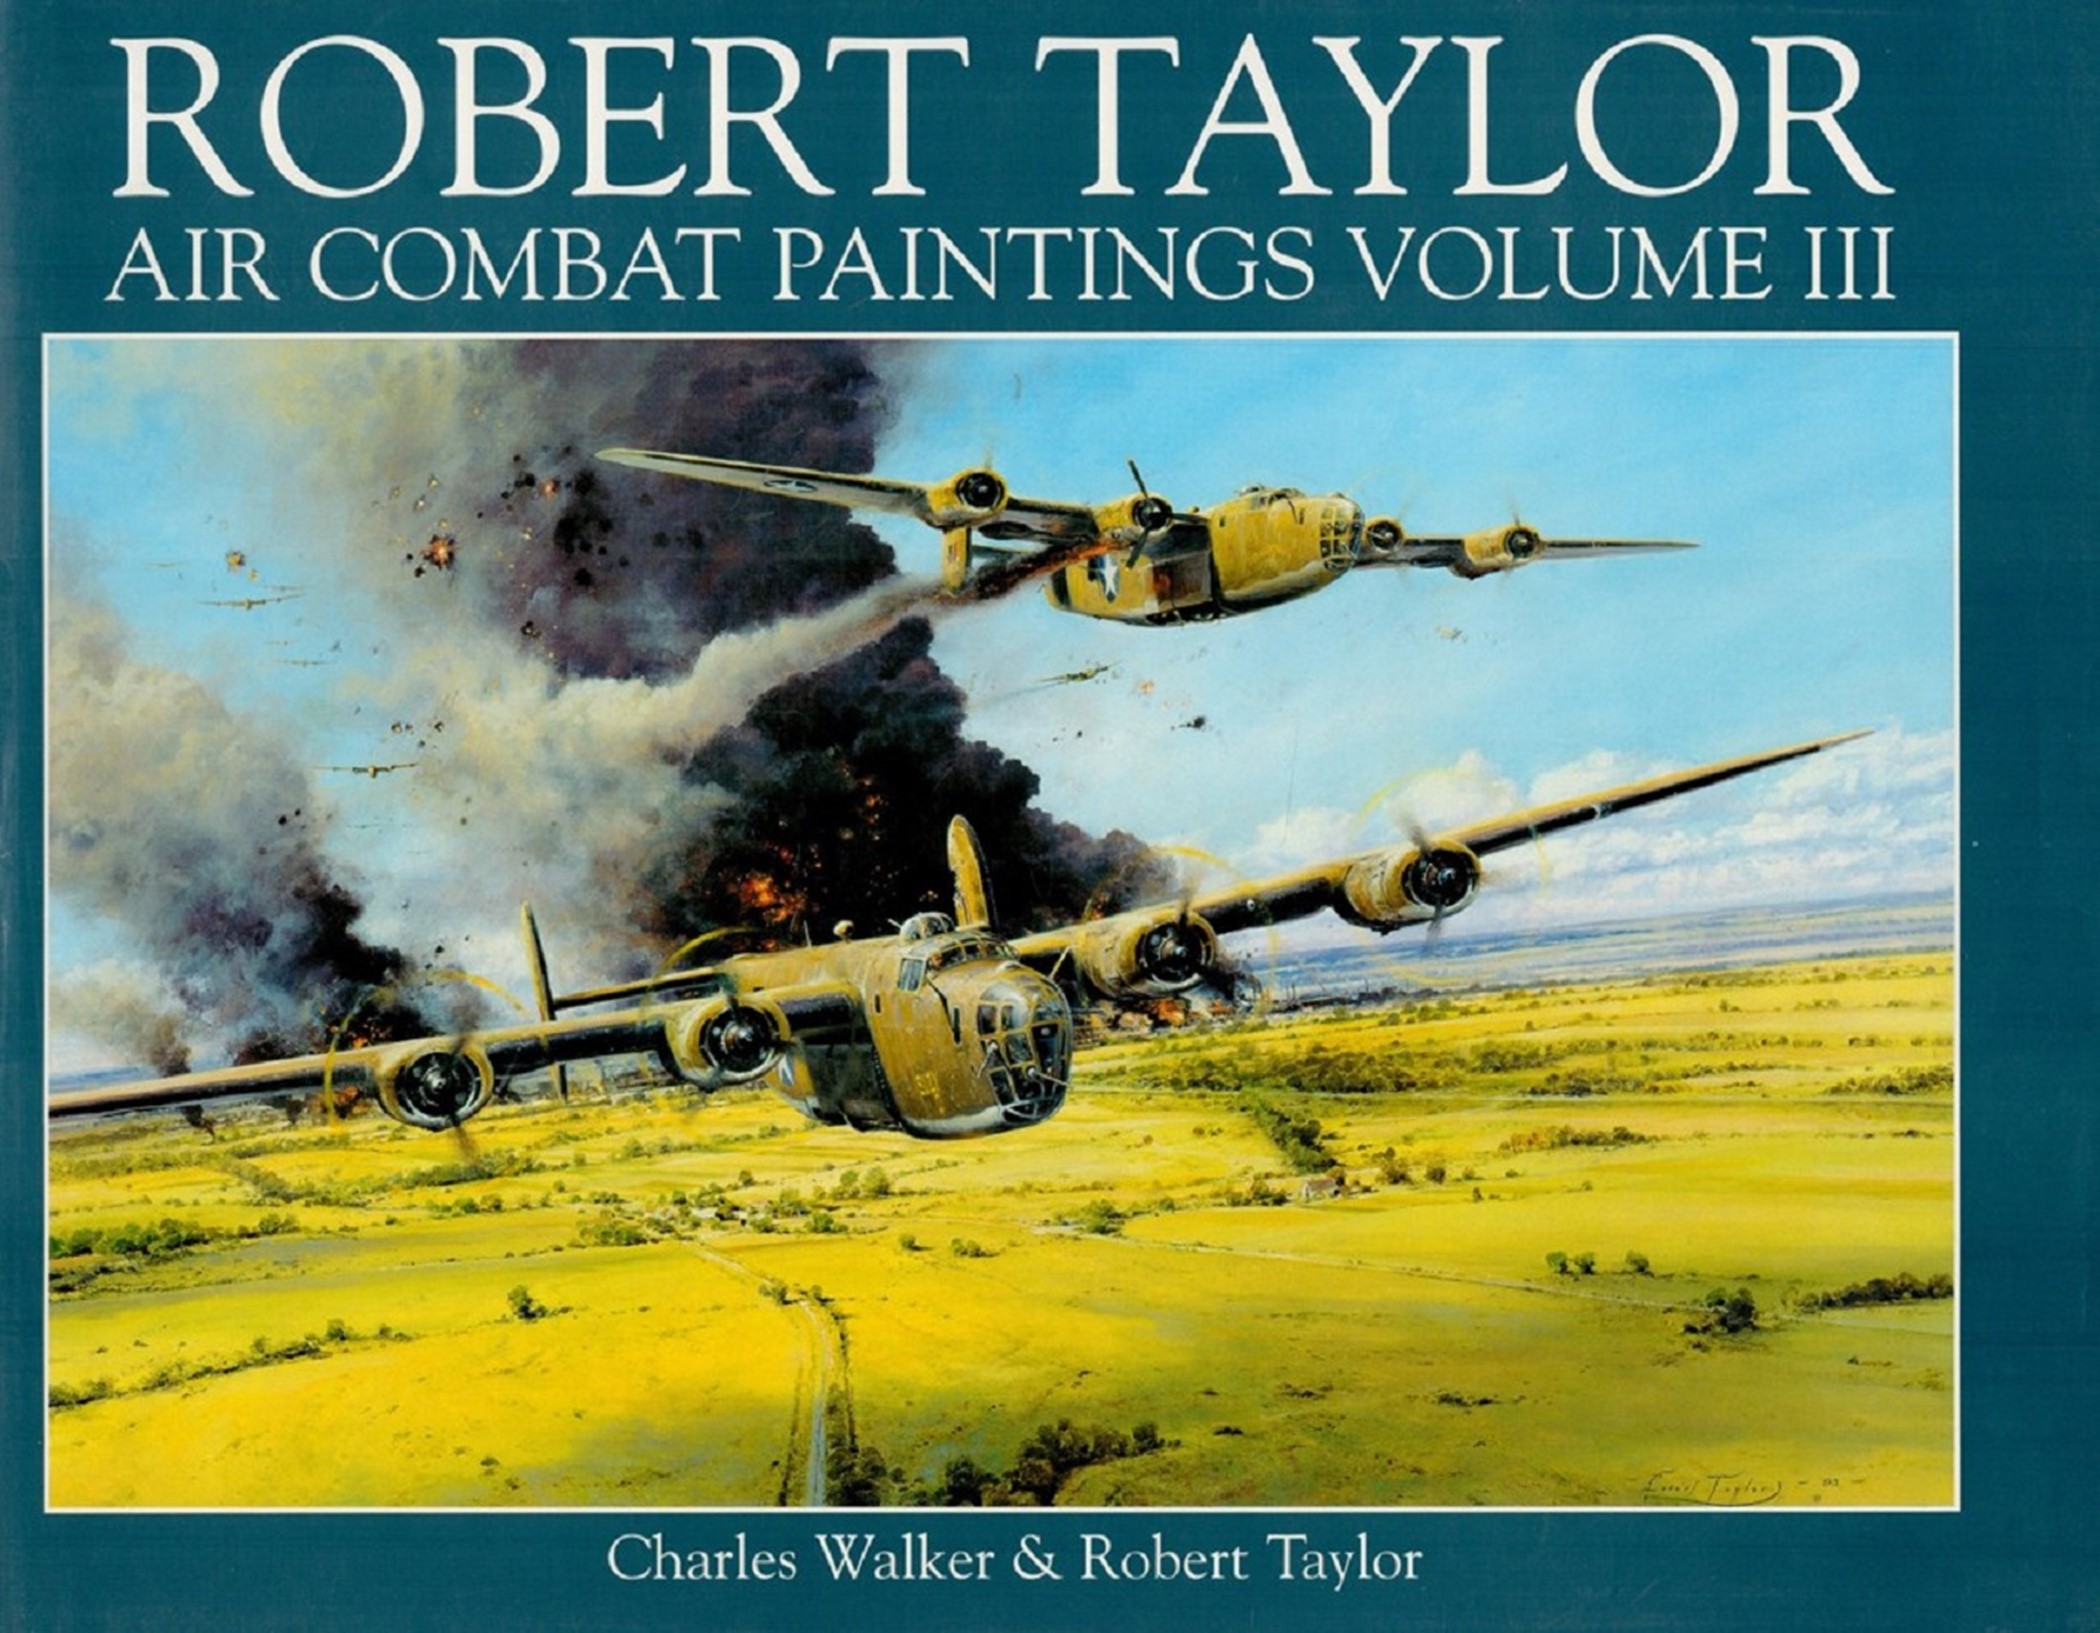 The Air Combat Paintings of Robert Taylor volumes 1, 2, 3, vol 1 1995 7th Edition with Slipcase, vol - Image 3 of 3